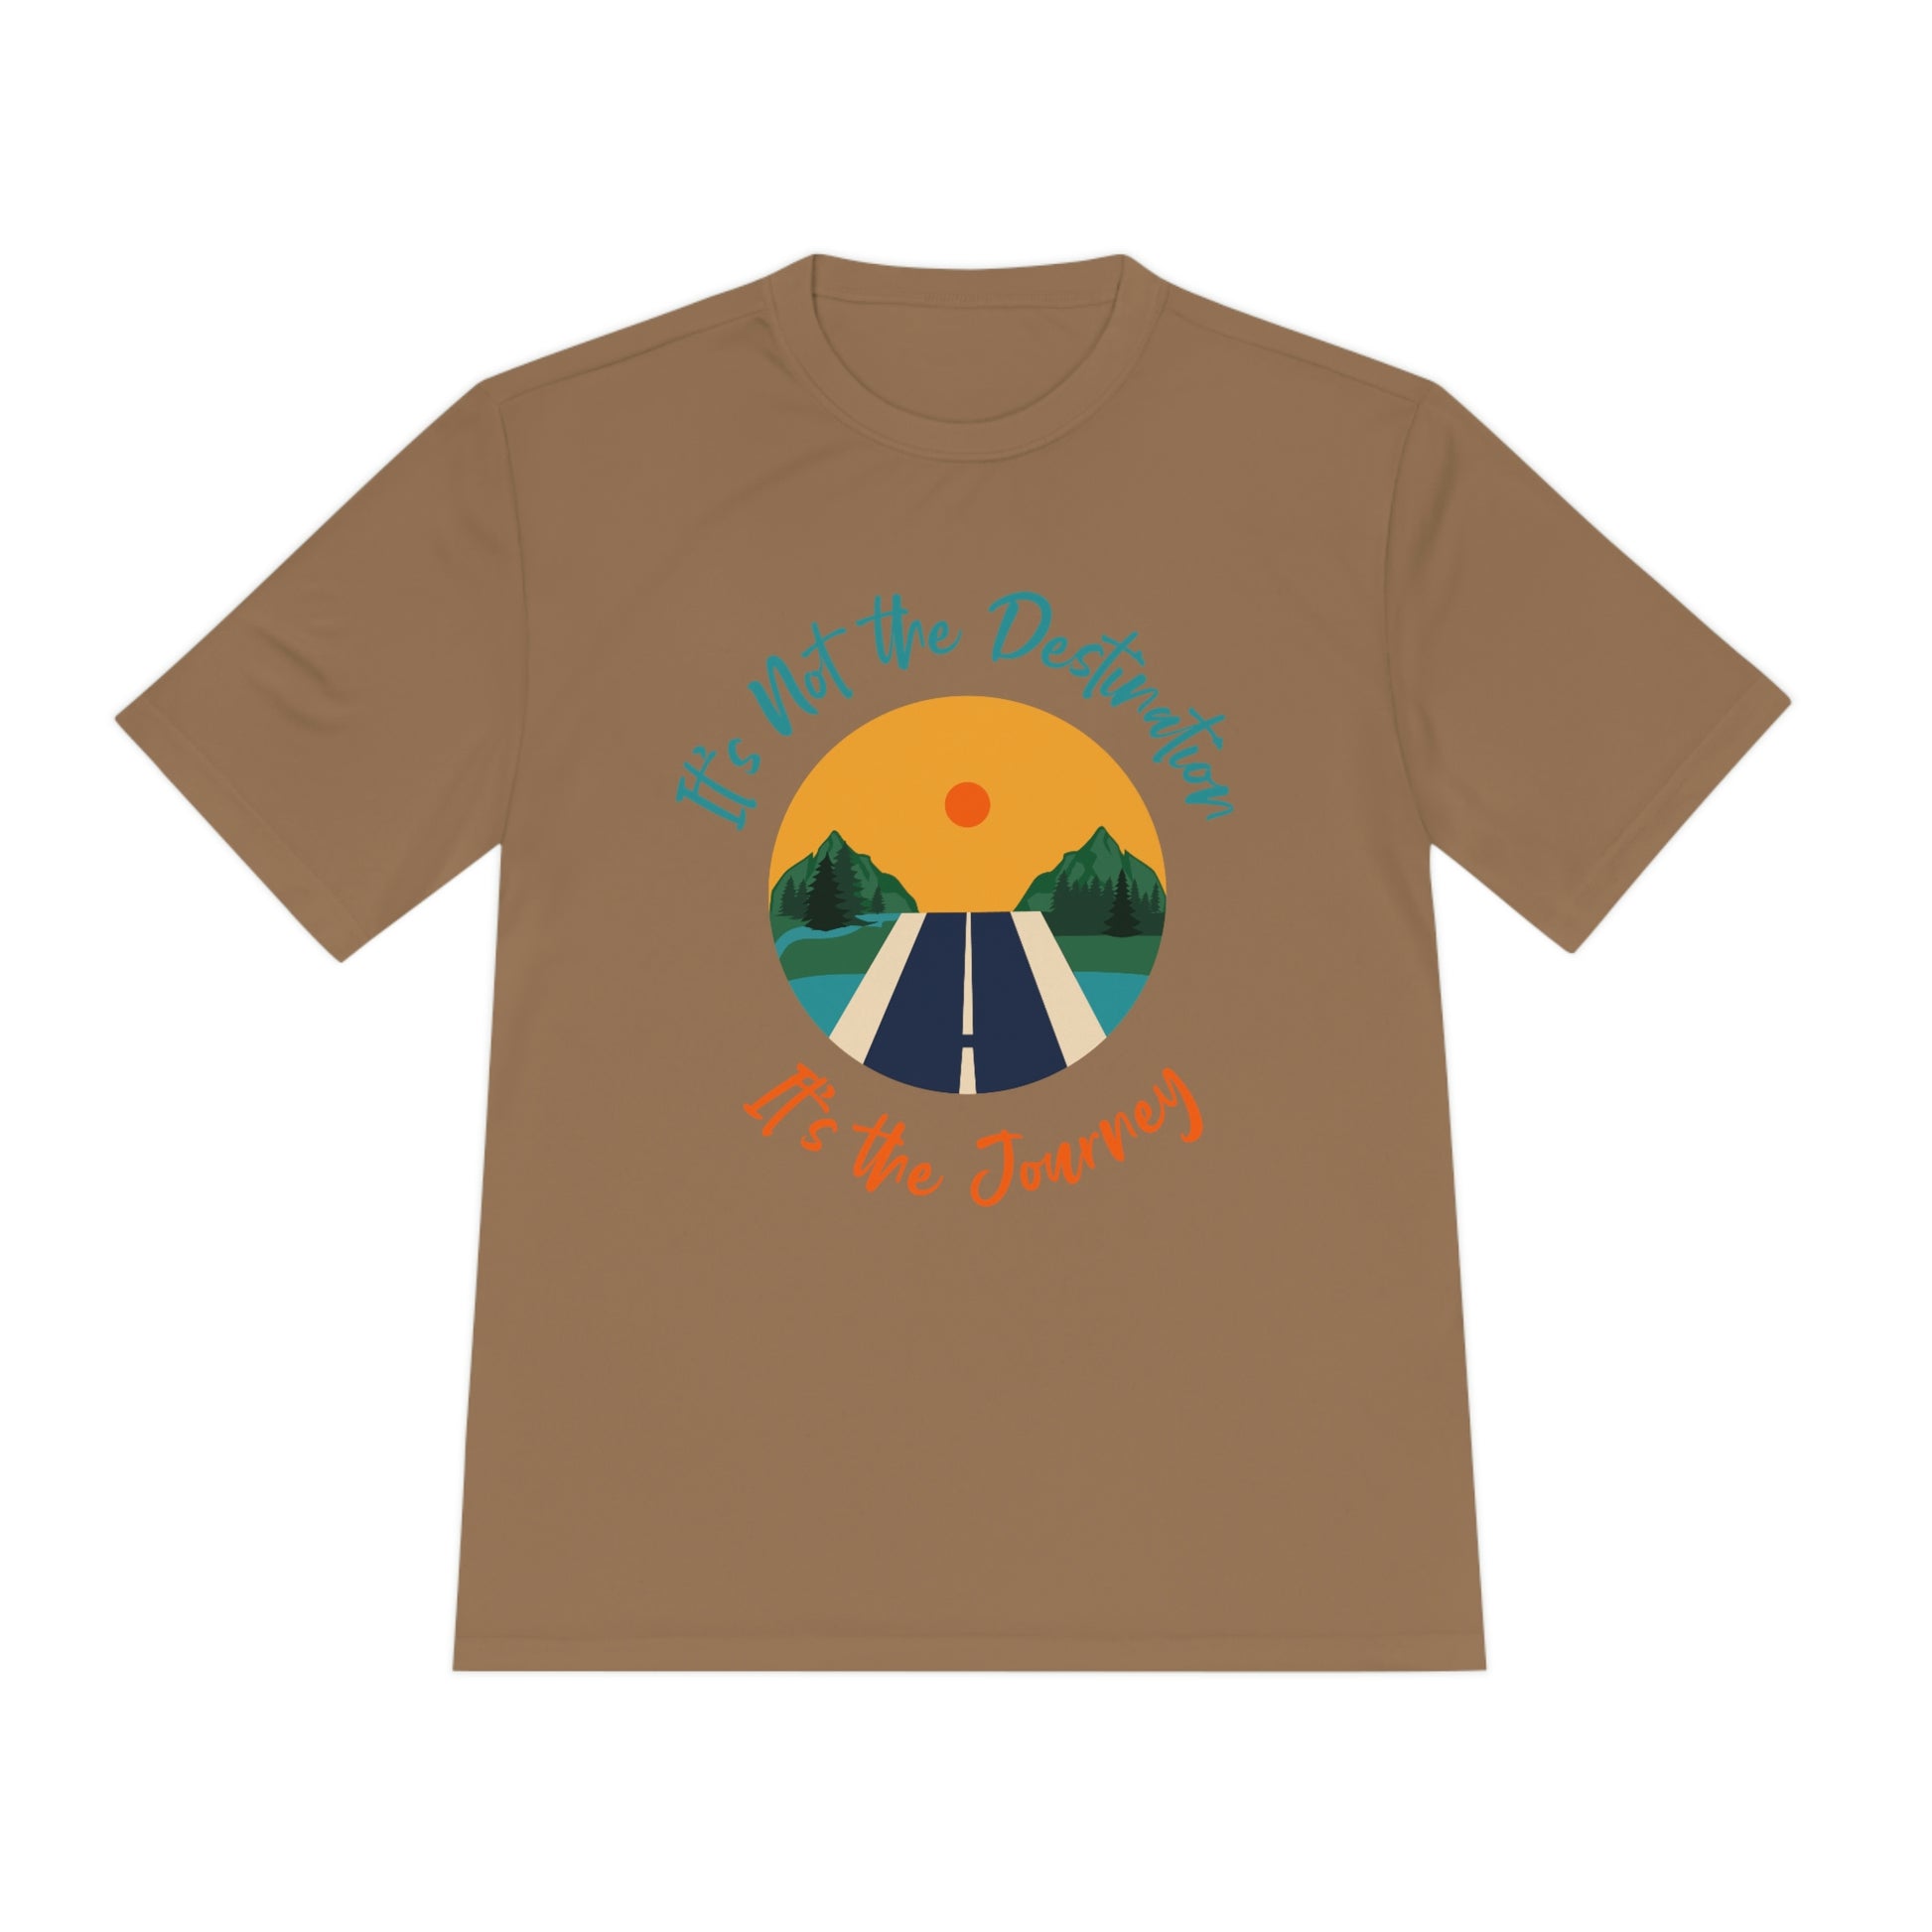 Flat front view of the brown t-shirt